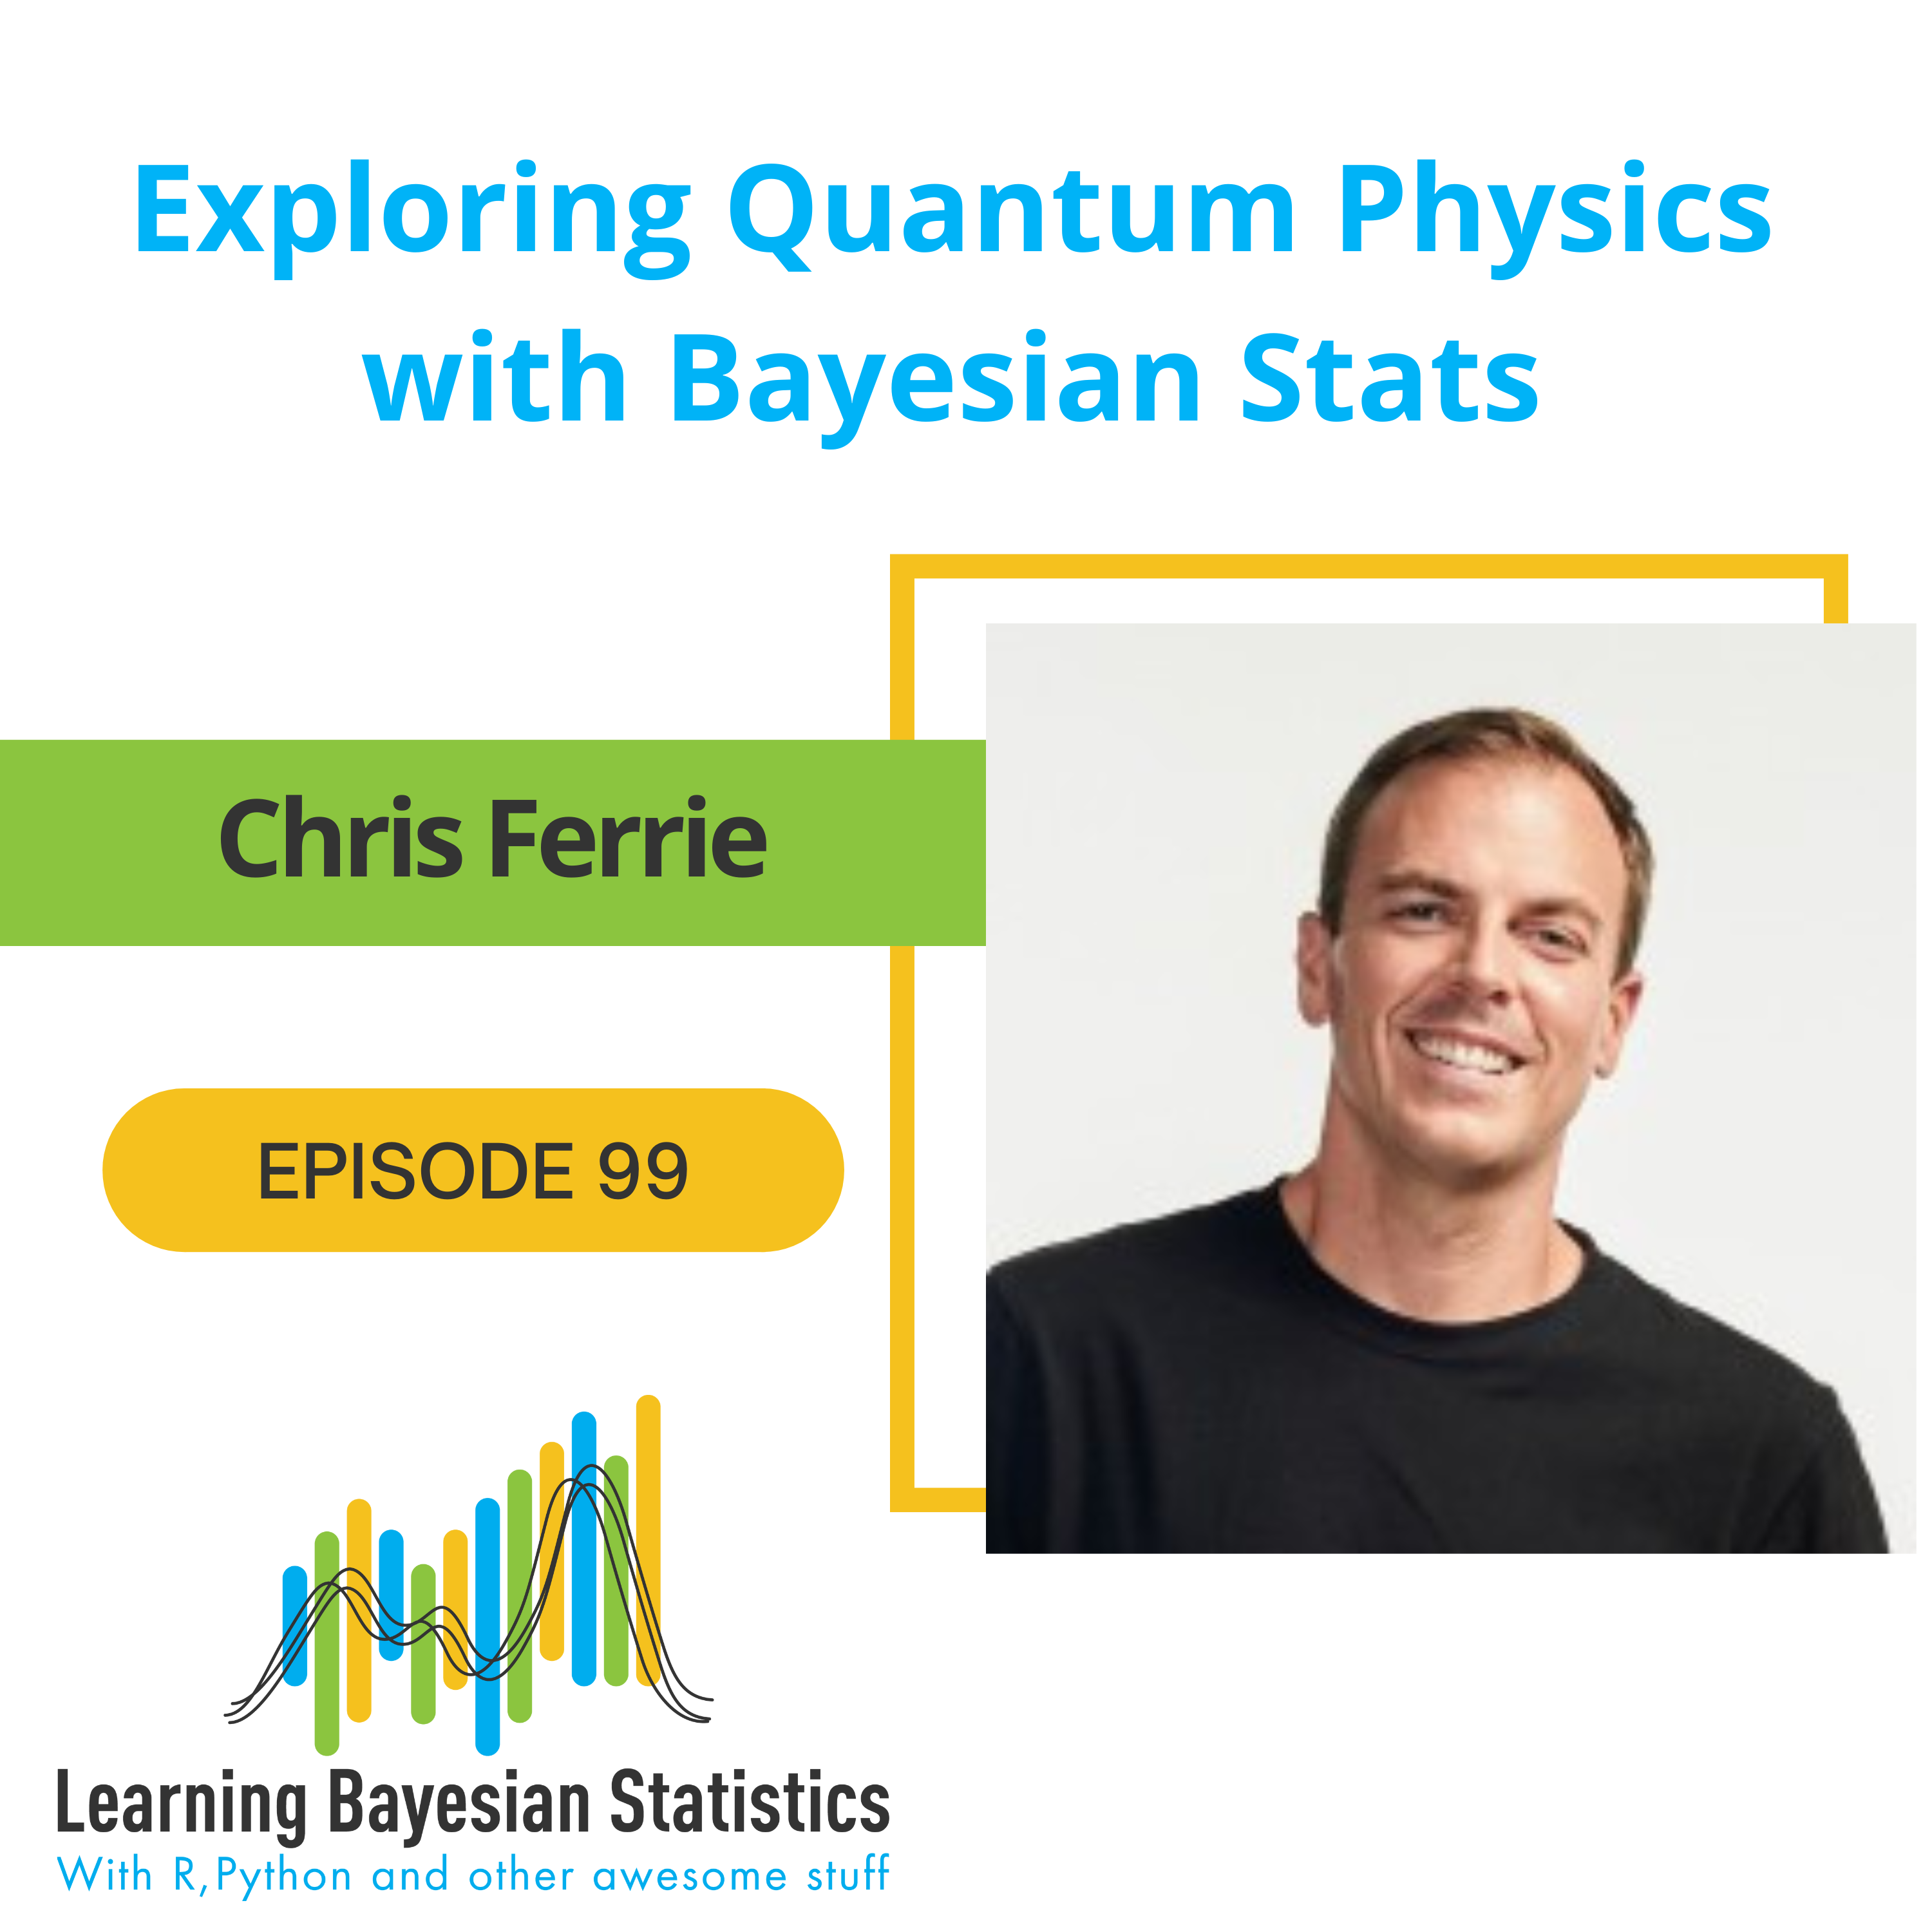 The biggest misconceptions about Bayes & Quantum Physics